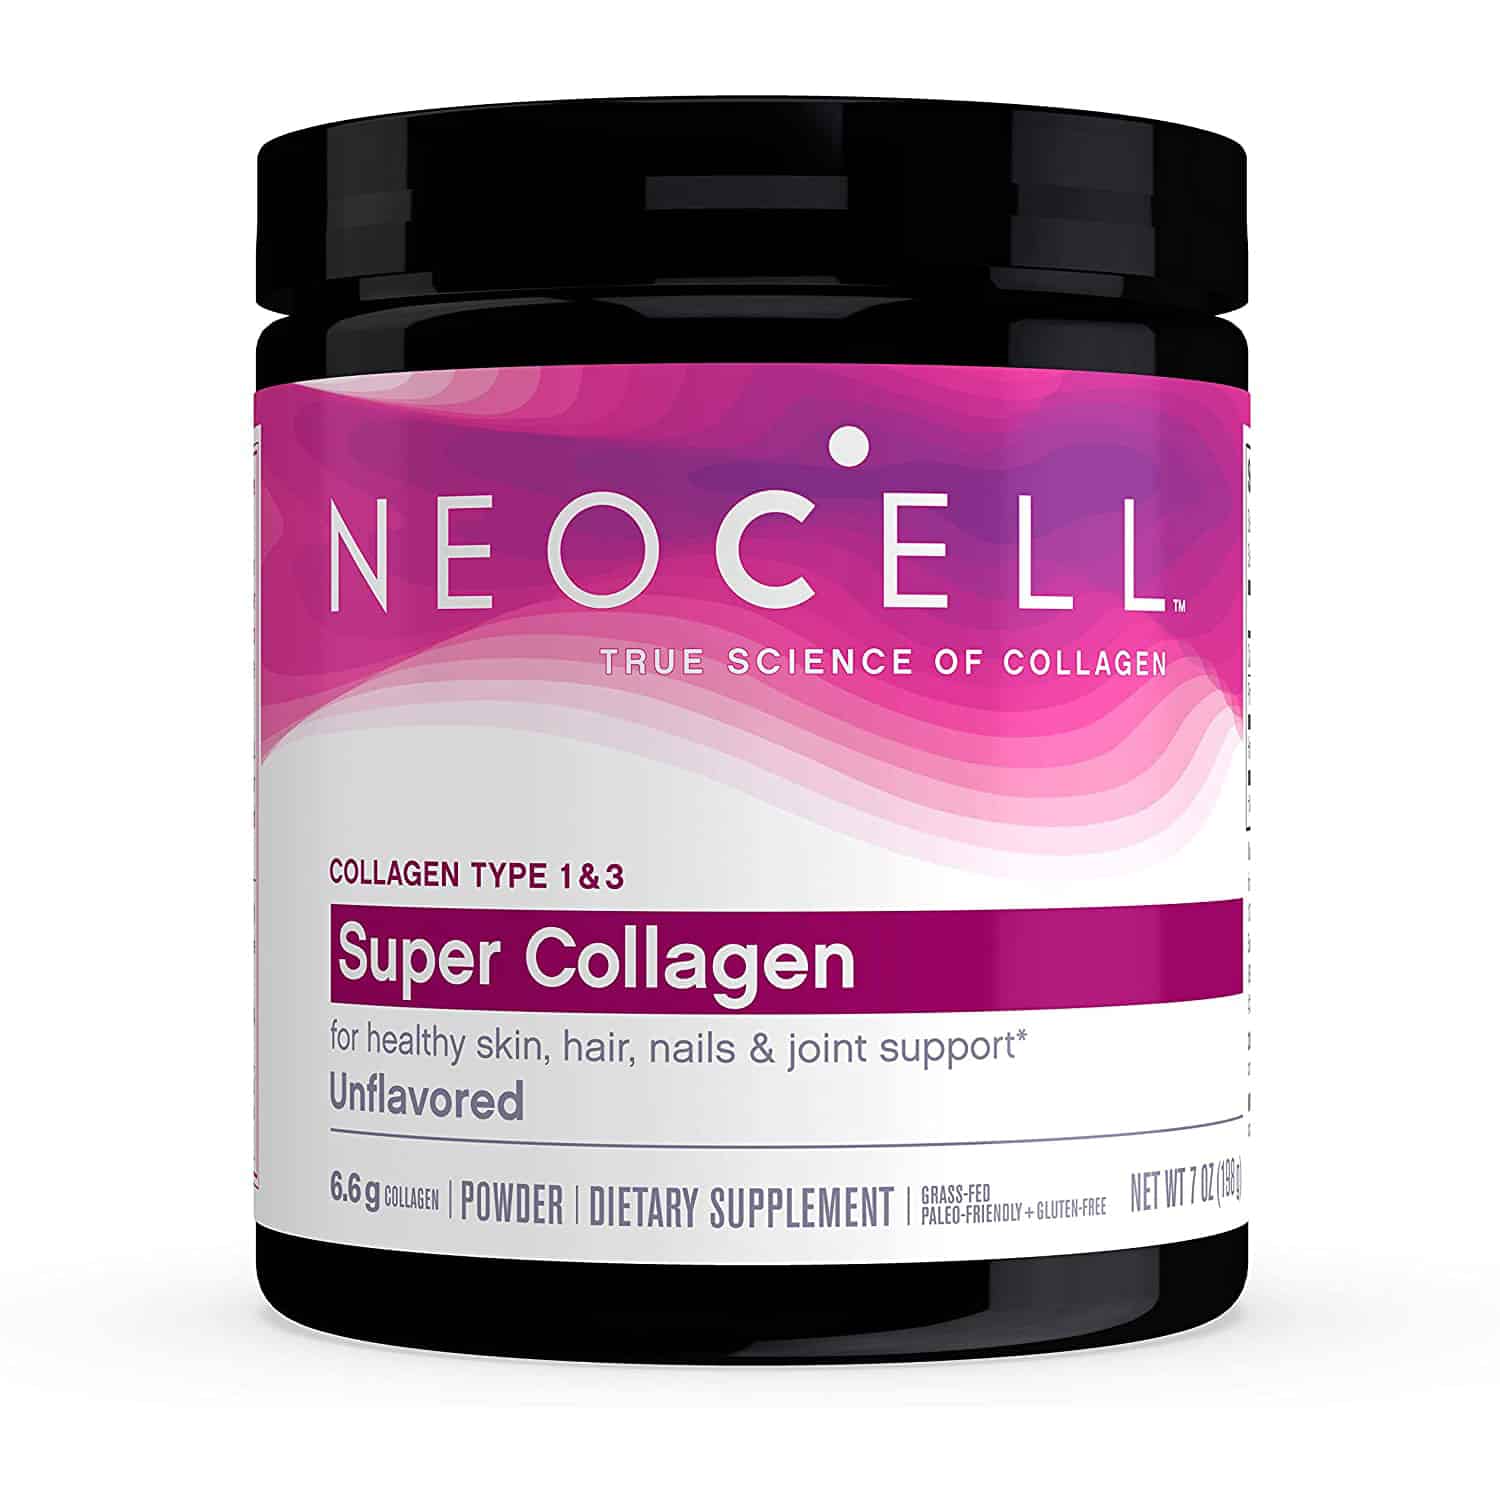 Top 10 Best Collagen Supplements in 2021 Reviews Show Guide Me